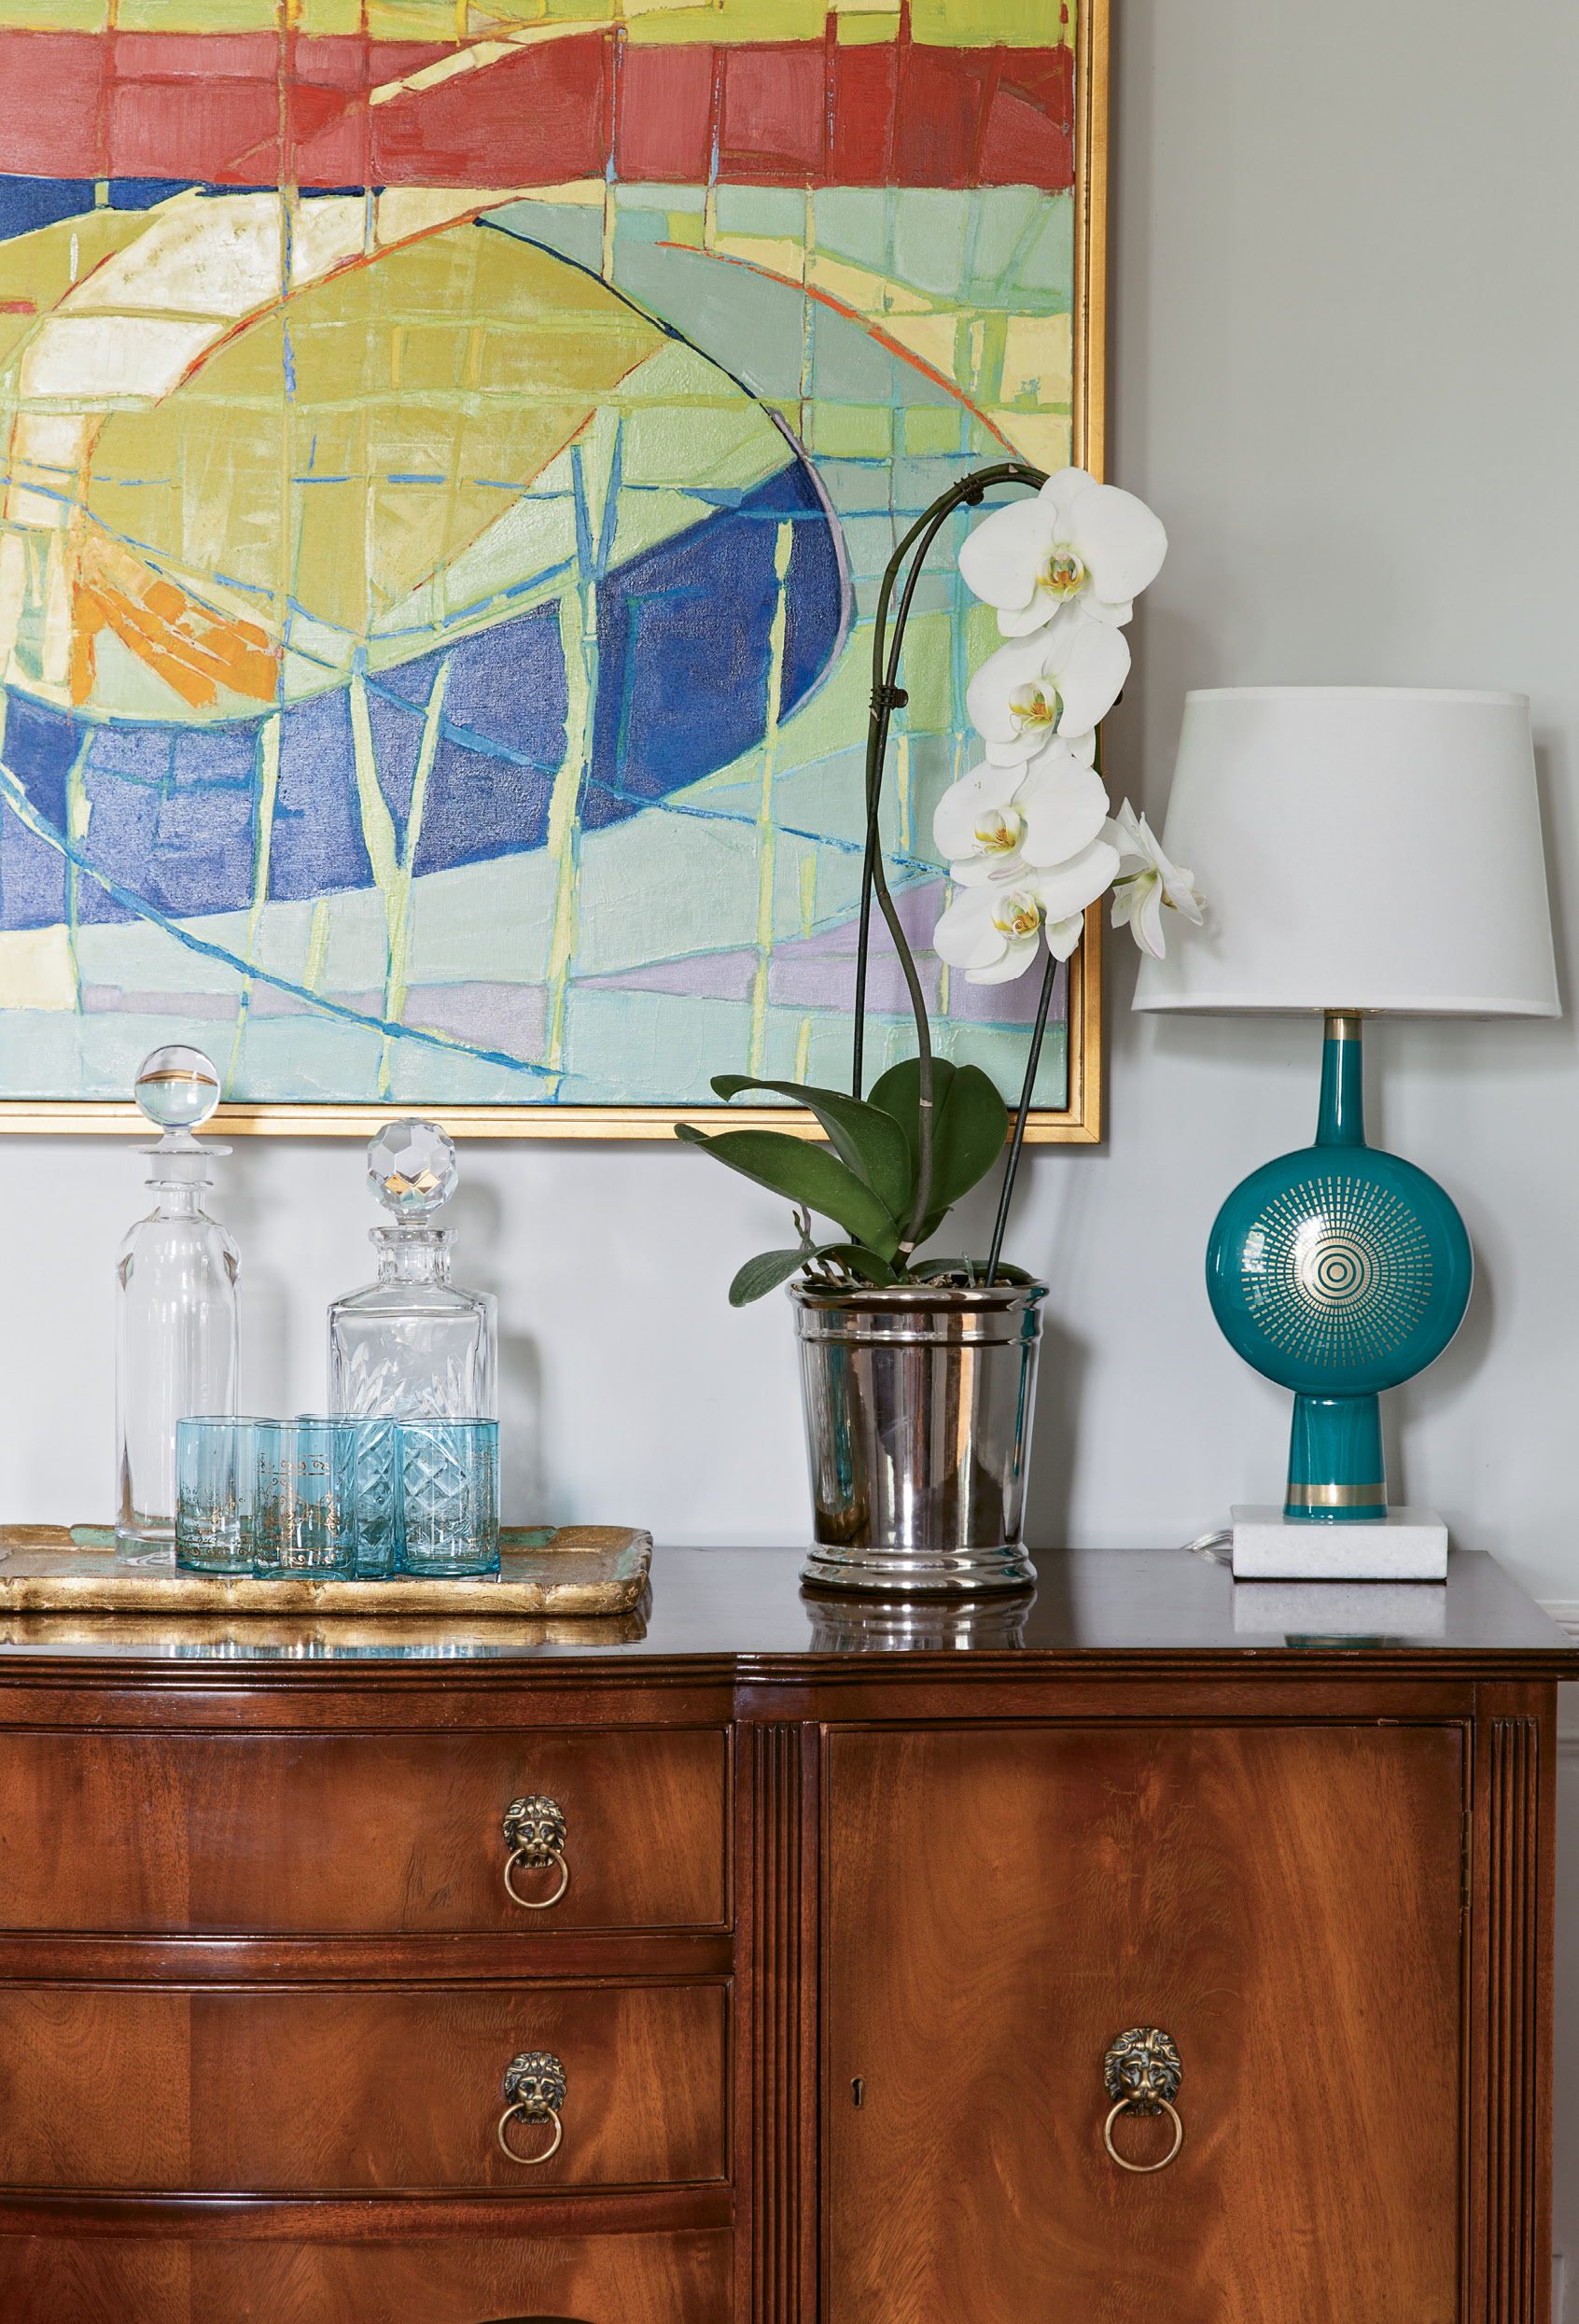 Shannon fell for this antique sideboard because its lion-head pulls mimicked the figurehead that has been mounted above the home’s entryway since she was a child living next door. The painting is by fellow Charleston Artist Collective member Ann Keane.